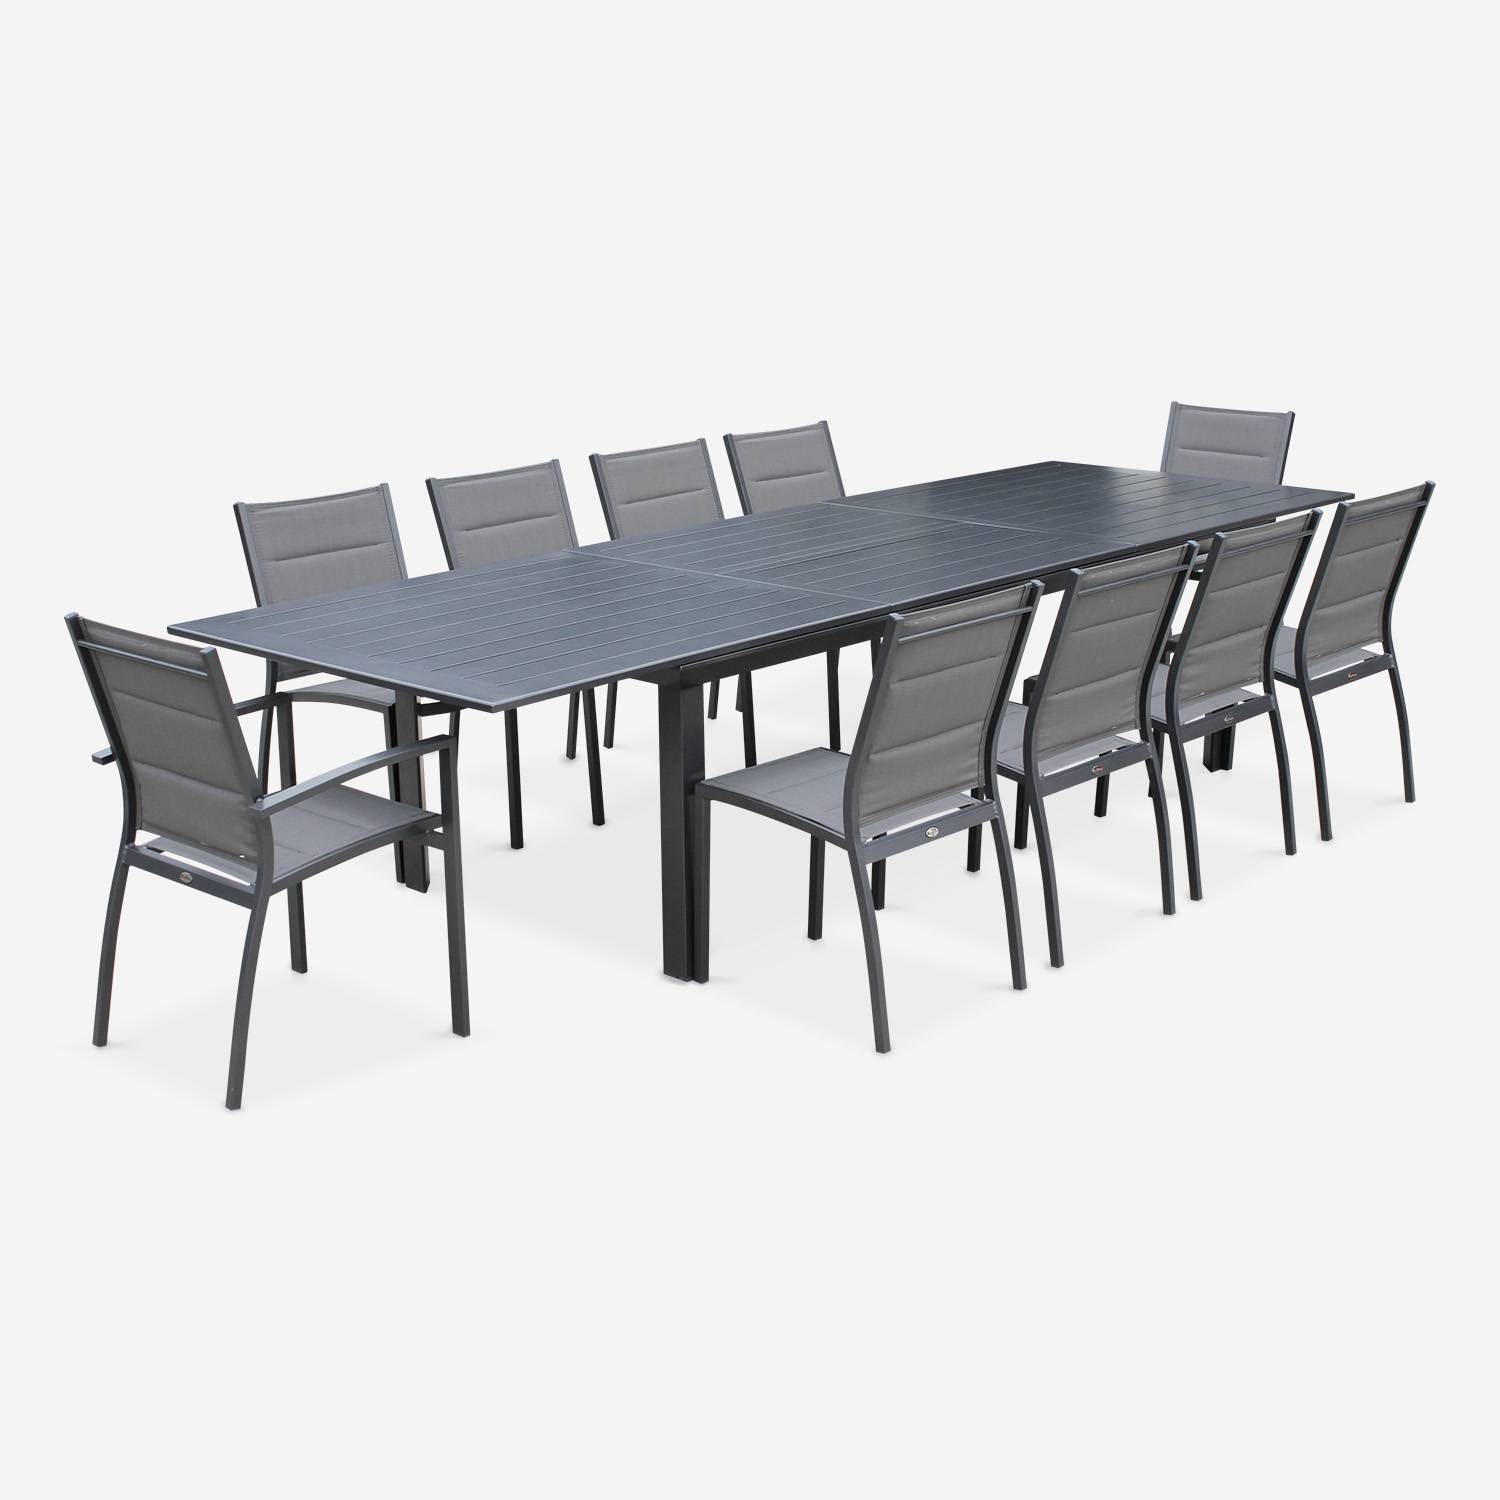 10-seater garden dining set, extendable 235-335cm aluminium table, 8 chairs and 2 armchairs - Odenton - Anthracite frame, Charcoal Grey textilene,sweeek,Photo2